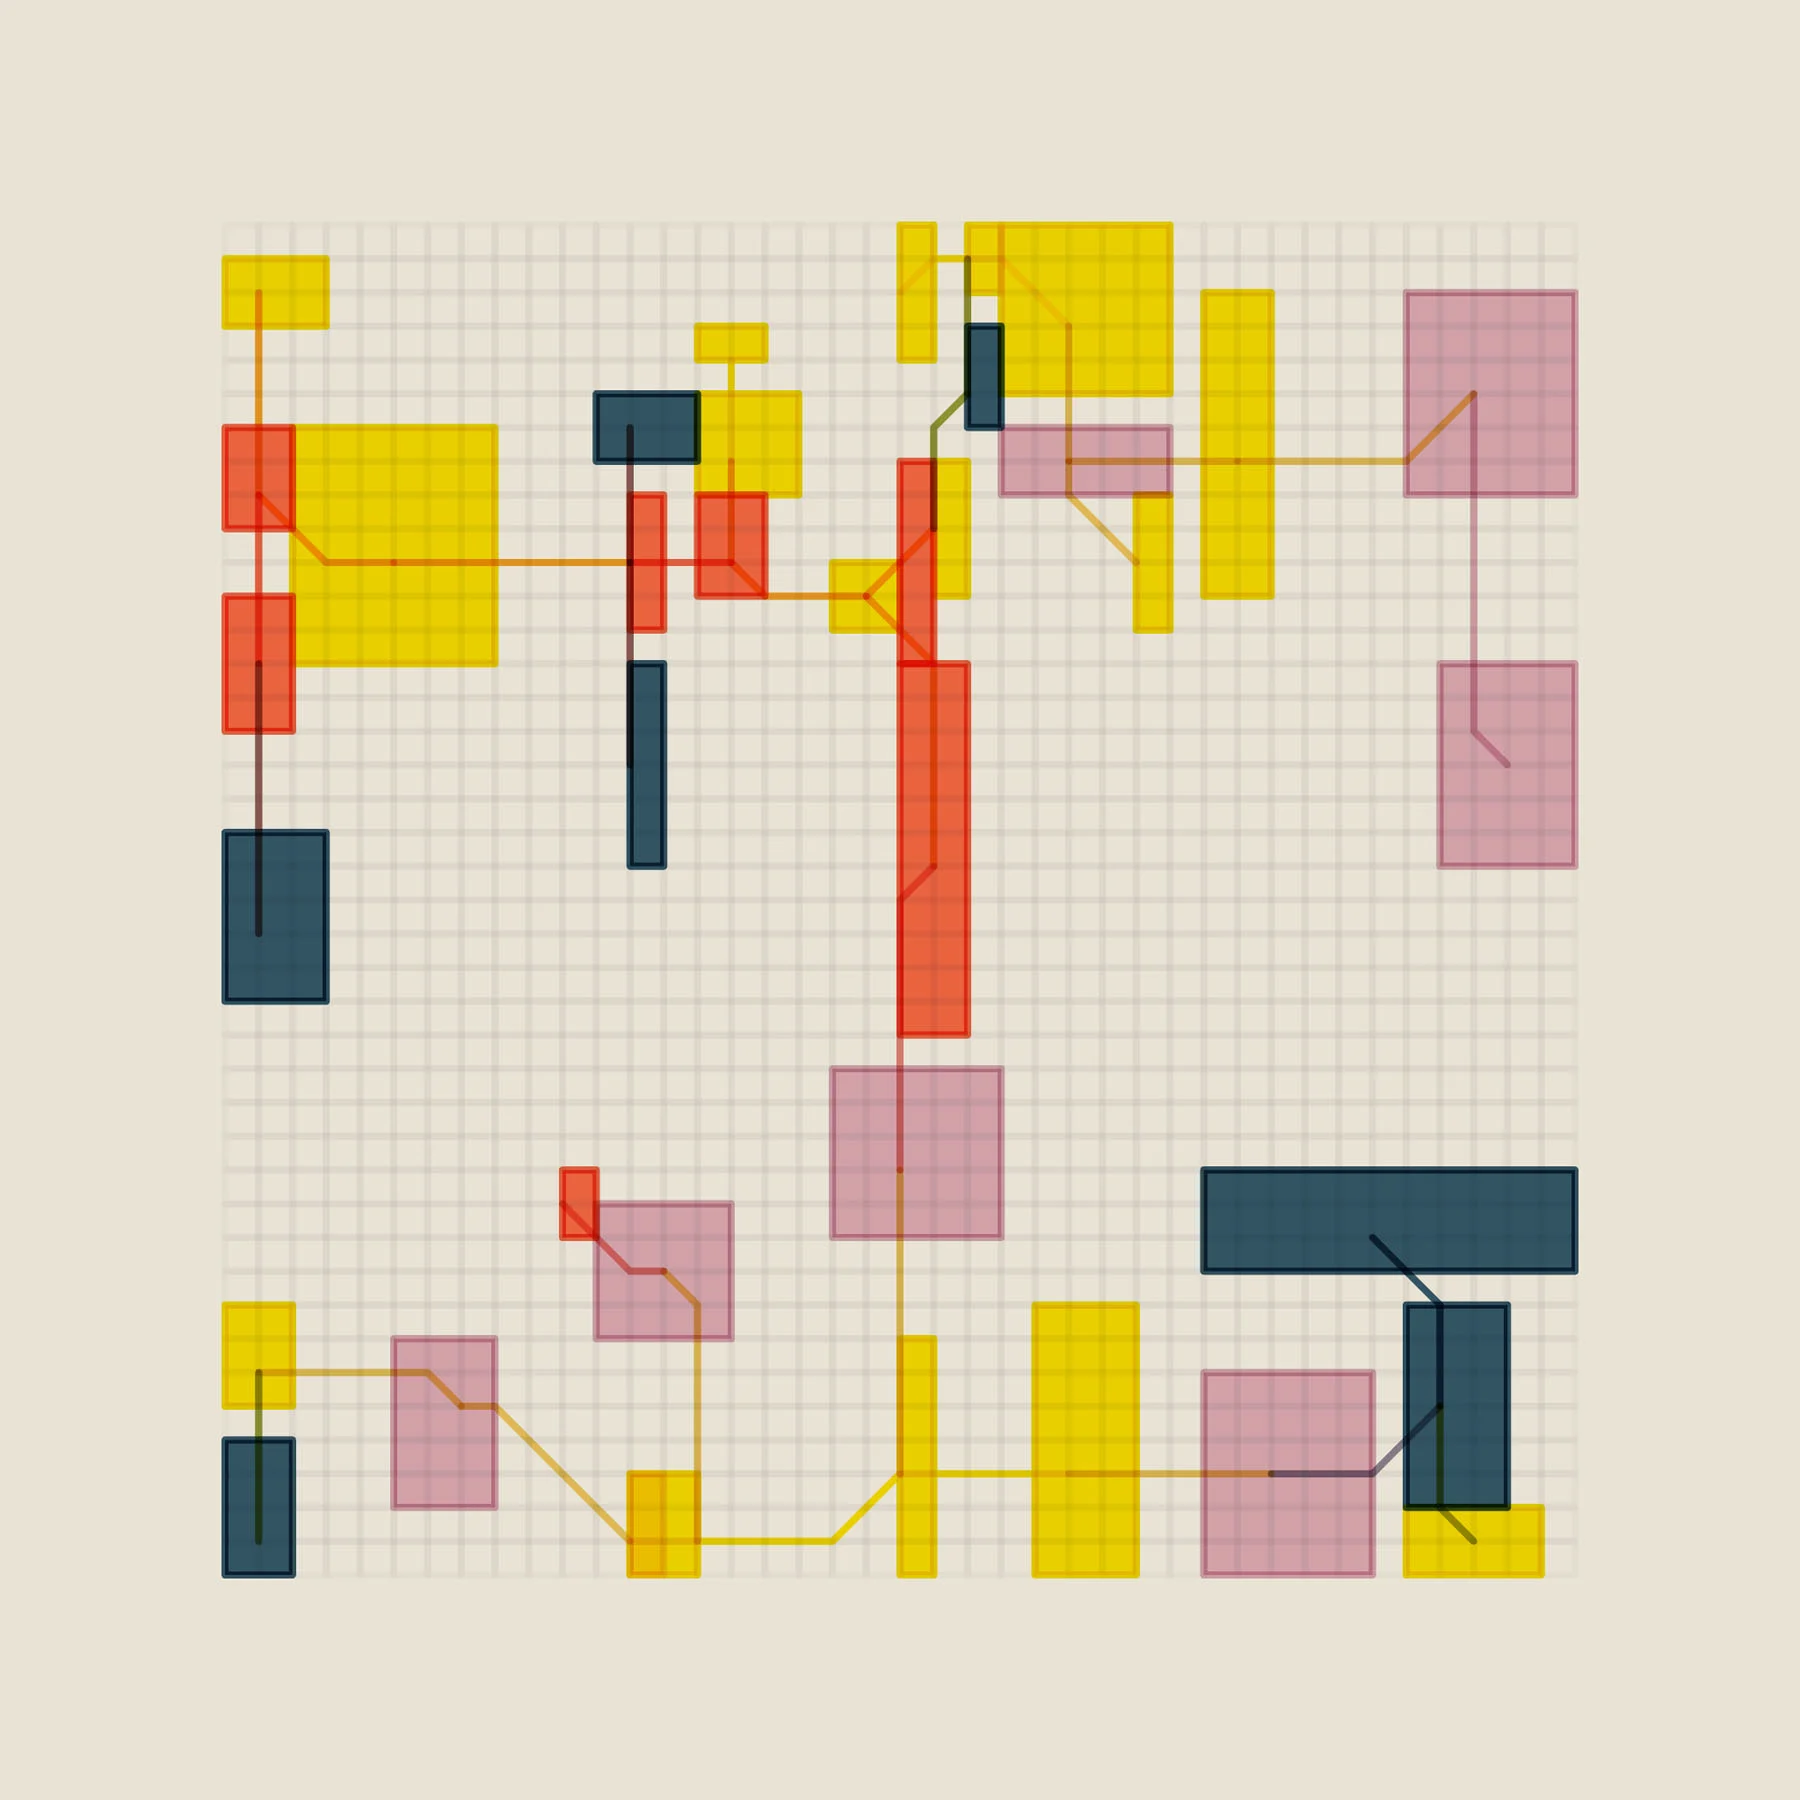 An abstract generative artwork of colorful rectangles, connected by circuit paths, atop a gridded background.